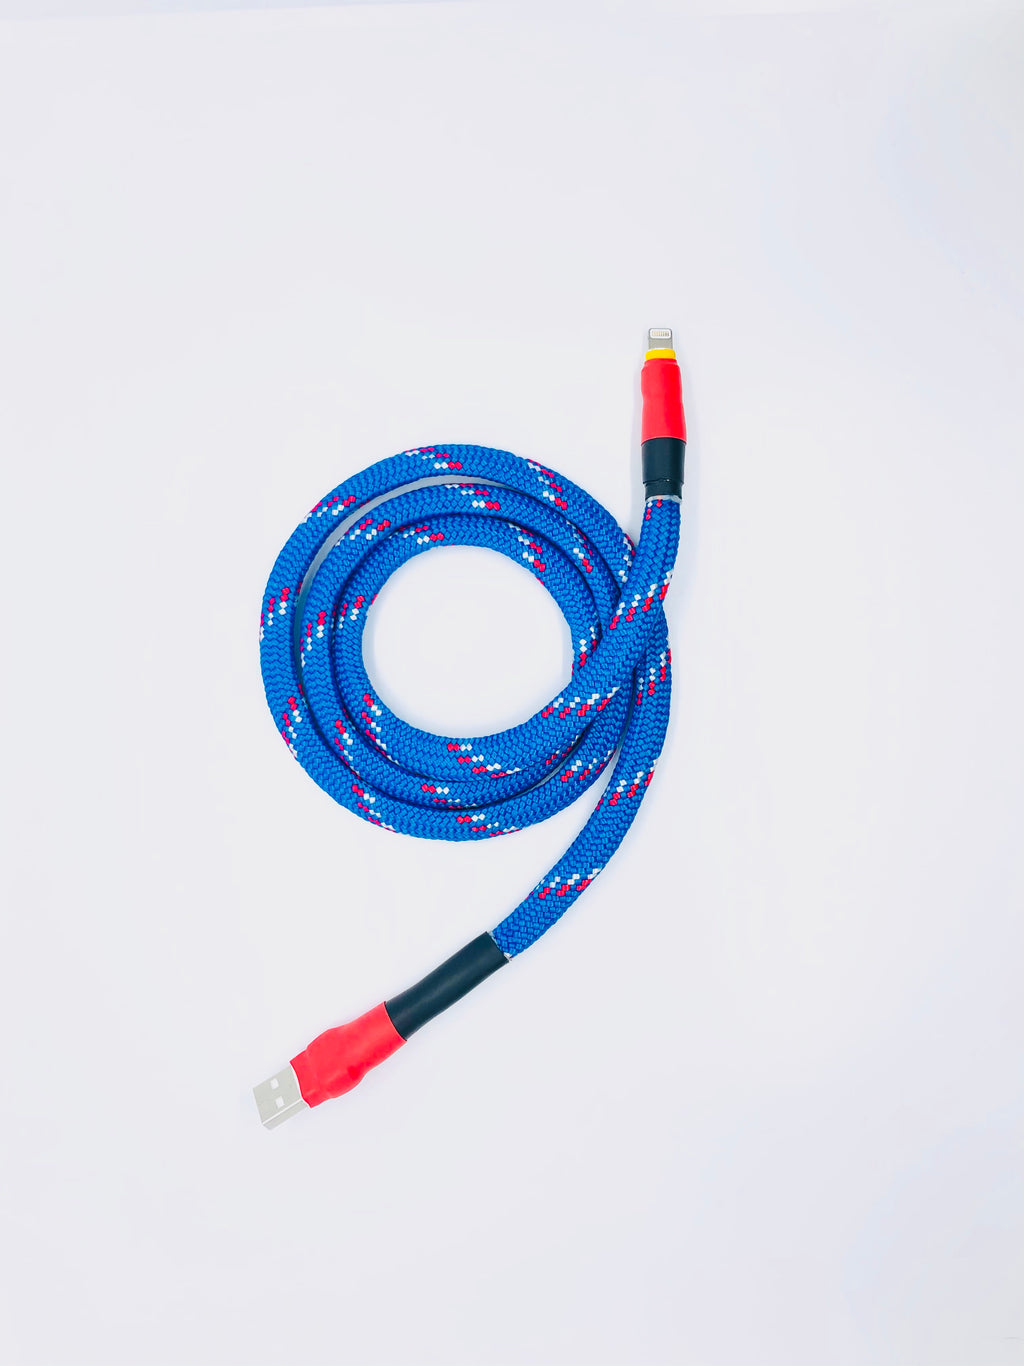 Thick USB-A -> Lightning with Red connectors and Blue Diamond cord - 3 feet